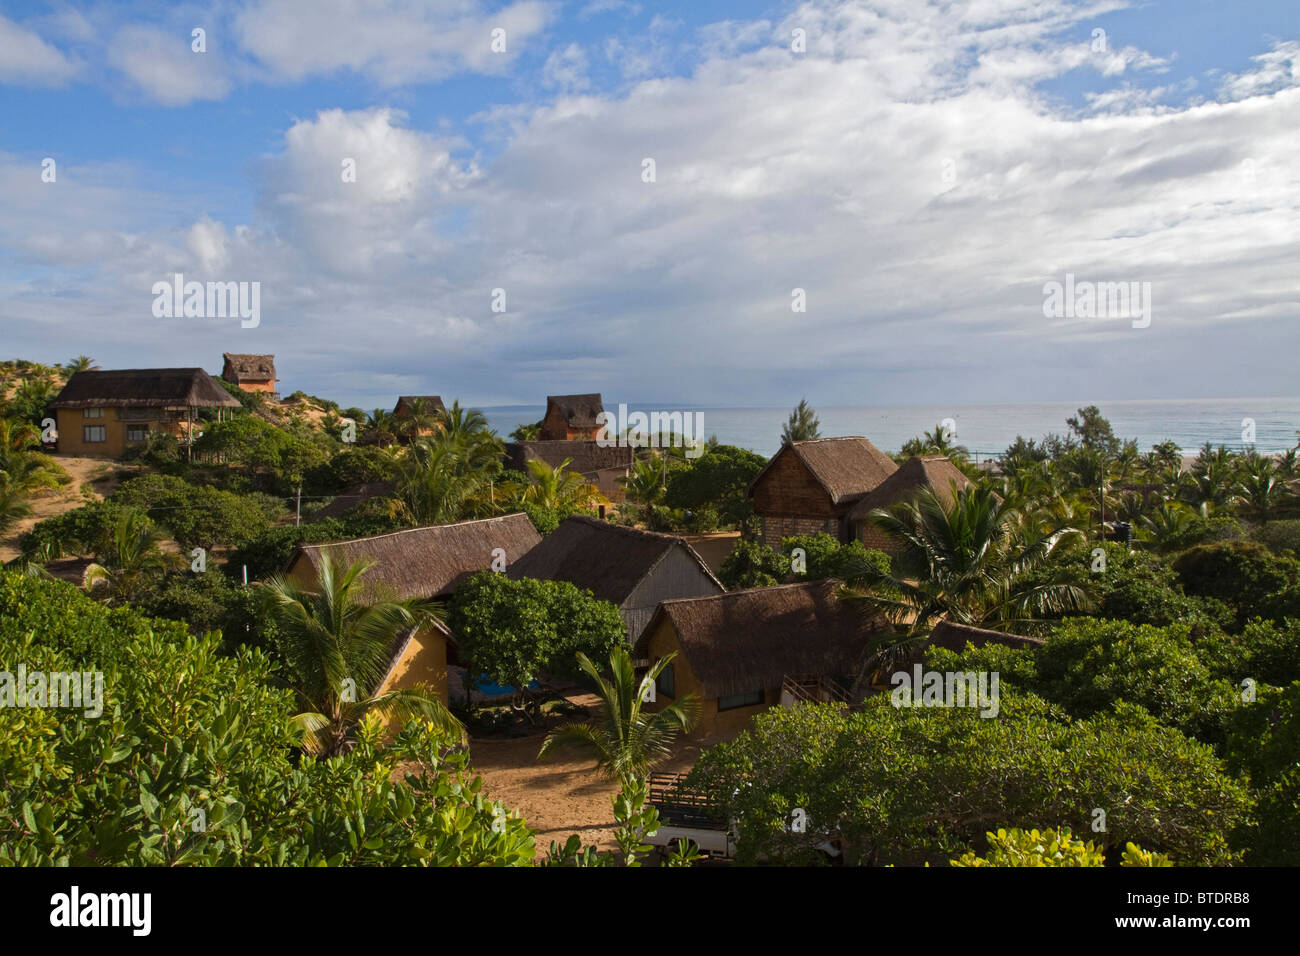 Scenic view of houses and holiday cottages on the Mozambique coast Stock Photo